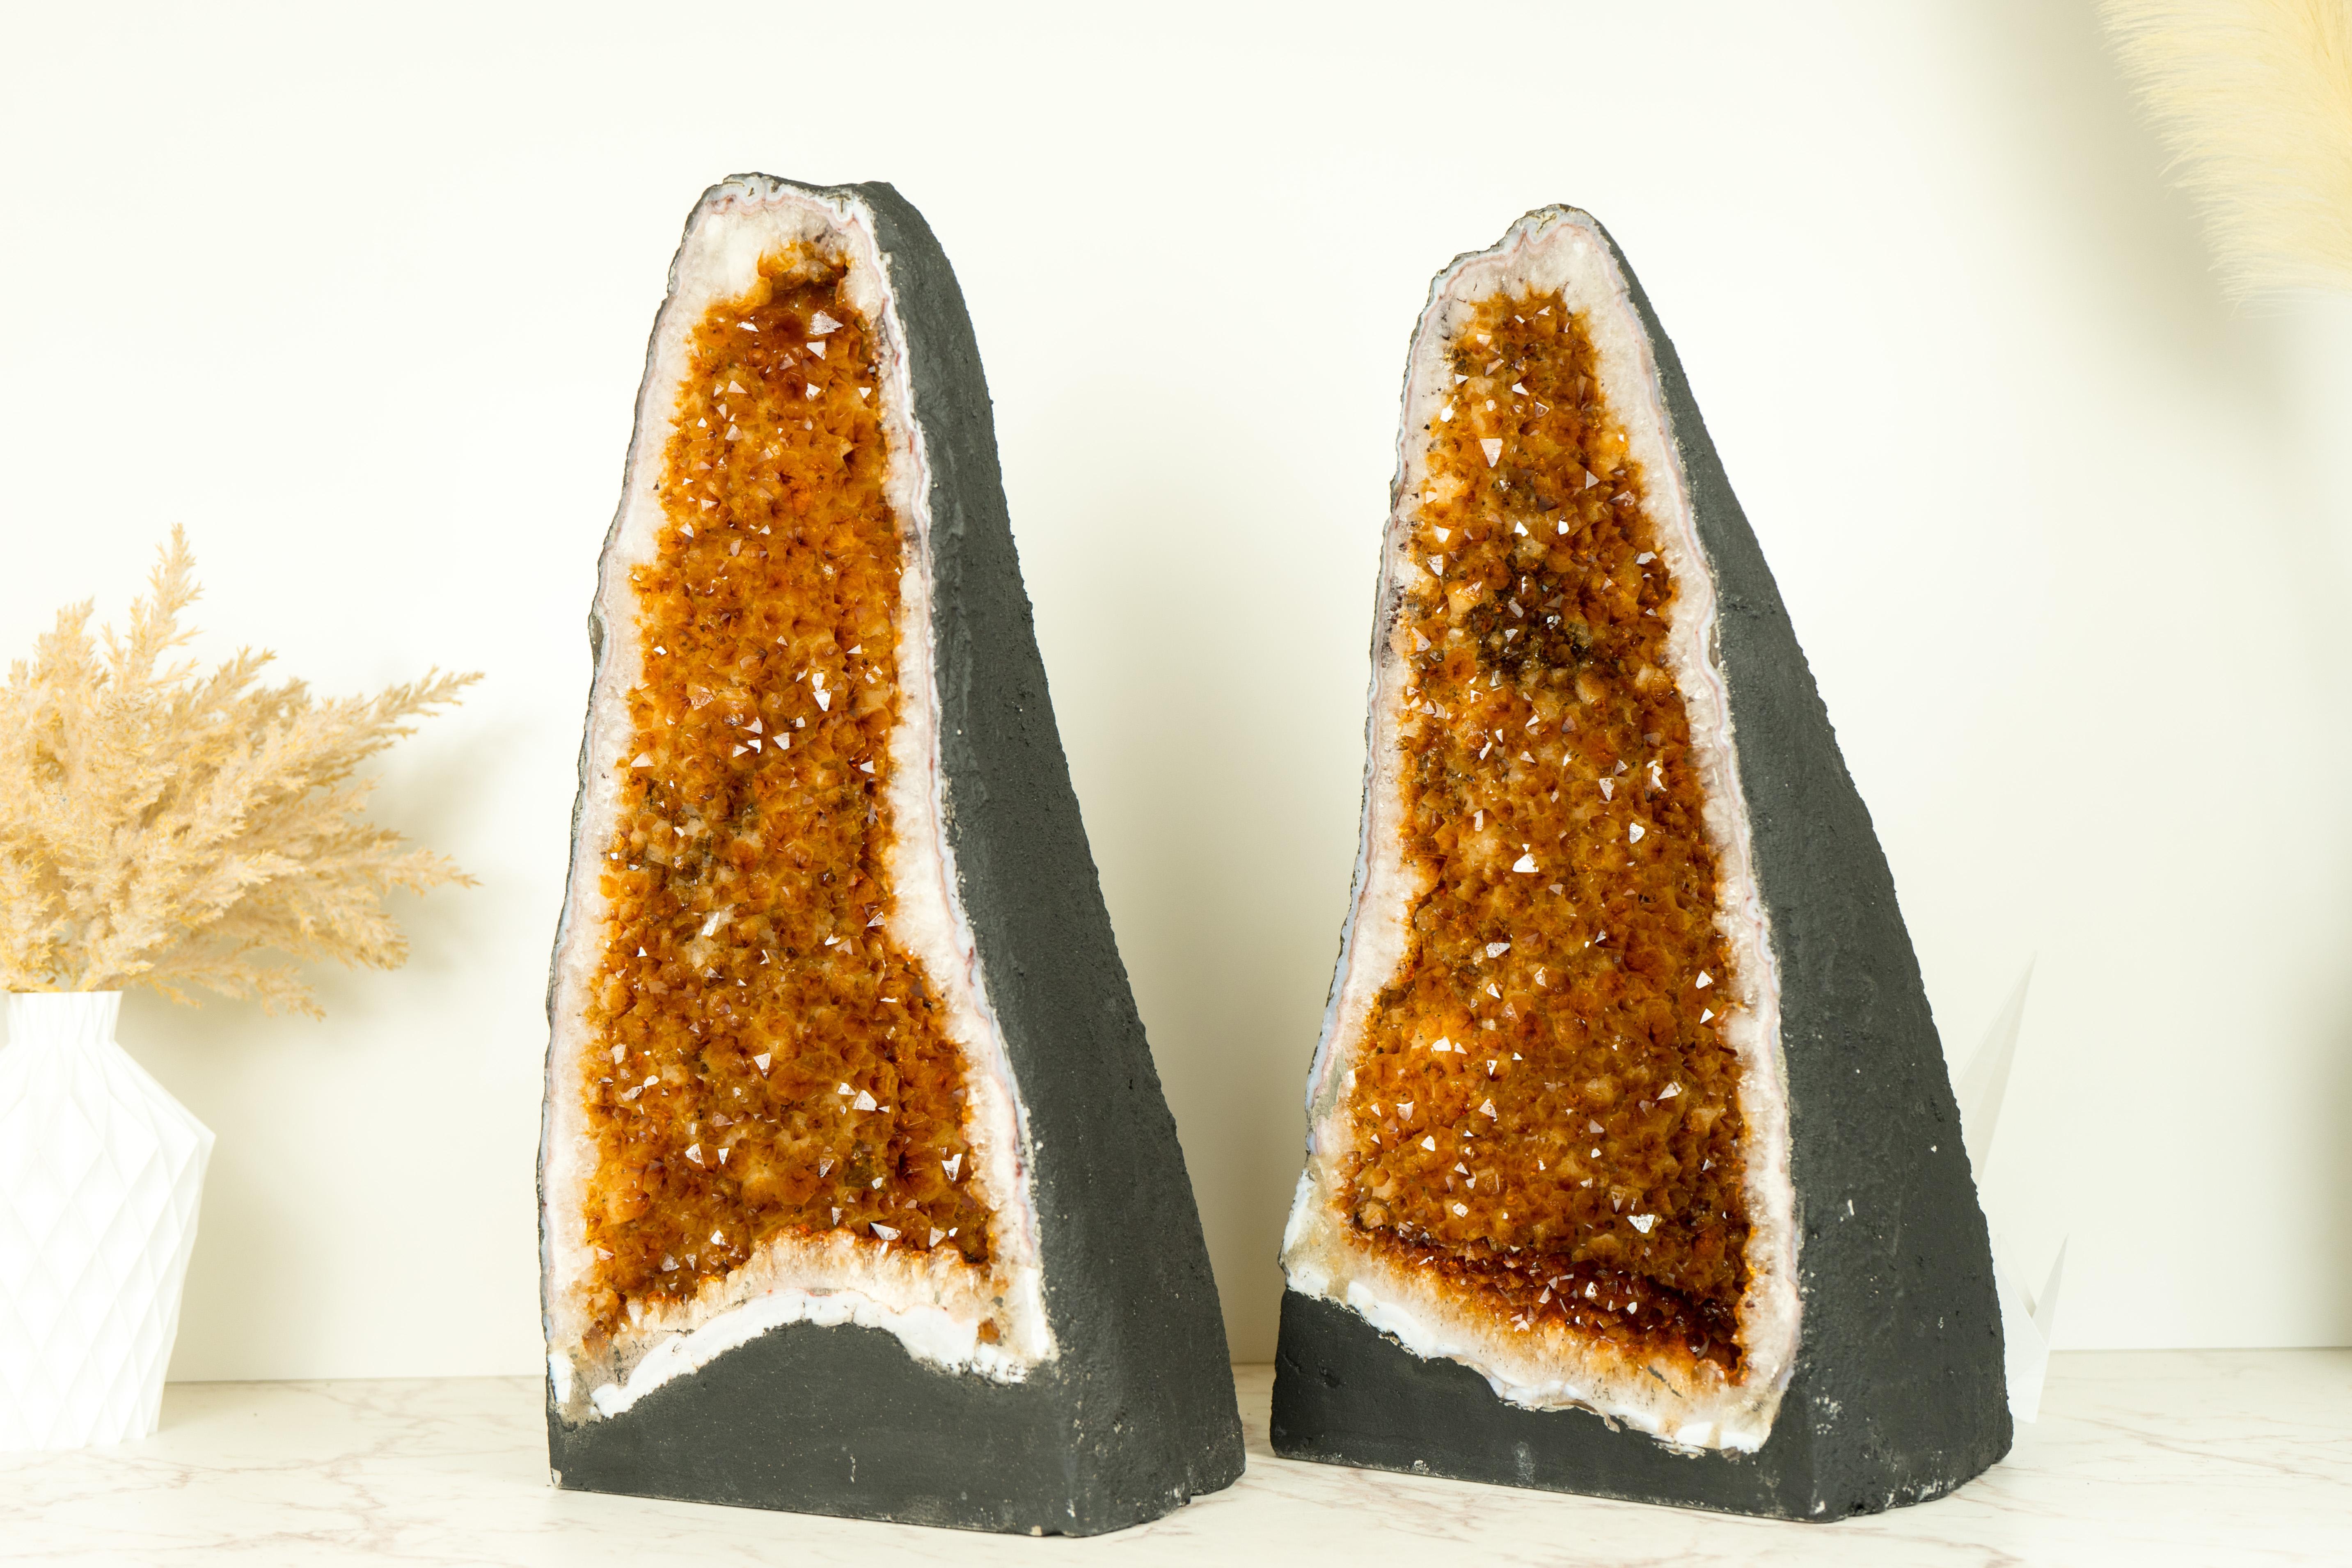 Pair of Citrine Geode Cathedrals with Sparkling AAA-Grade, Rich Orange Druzy 1